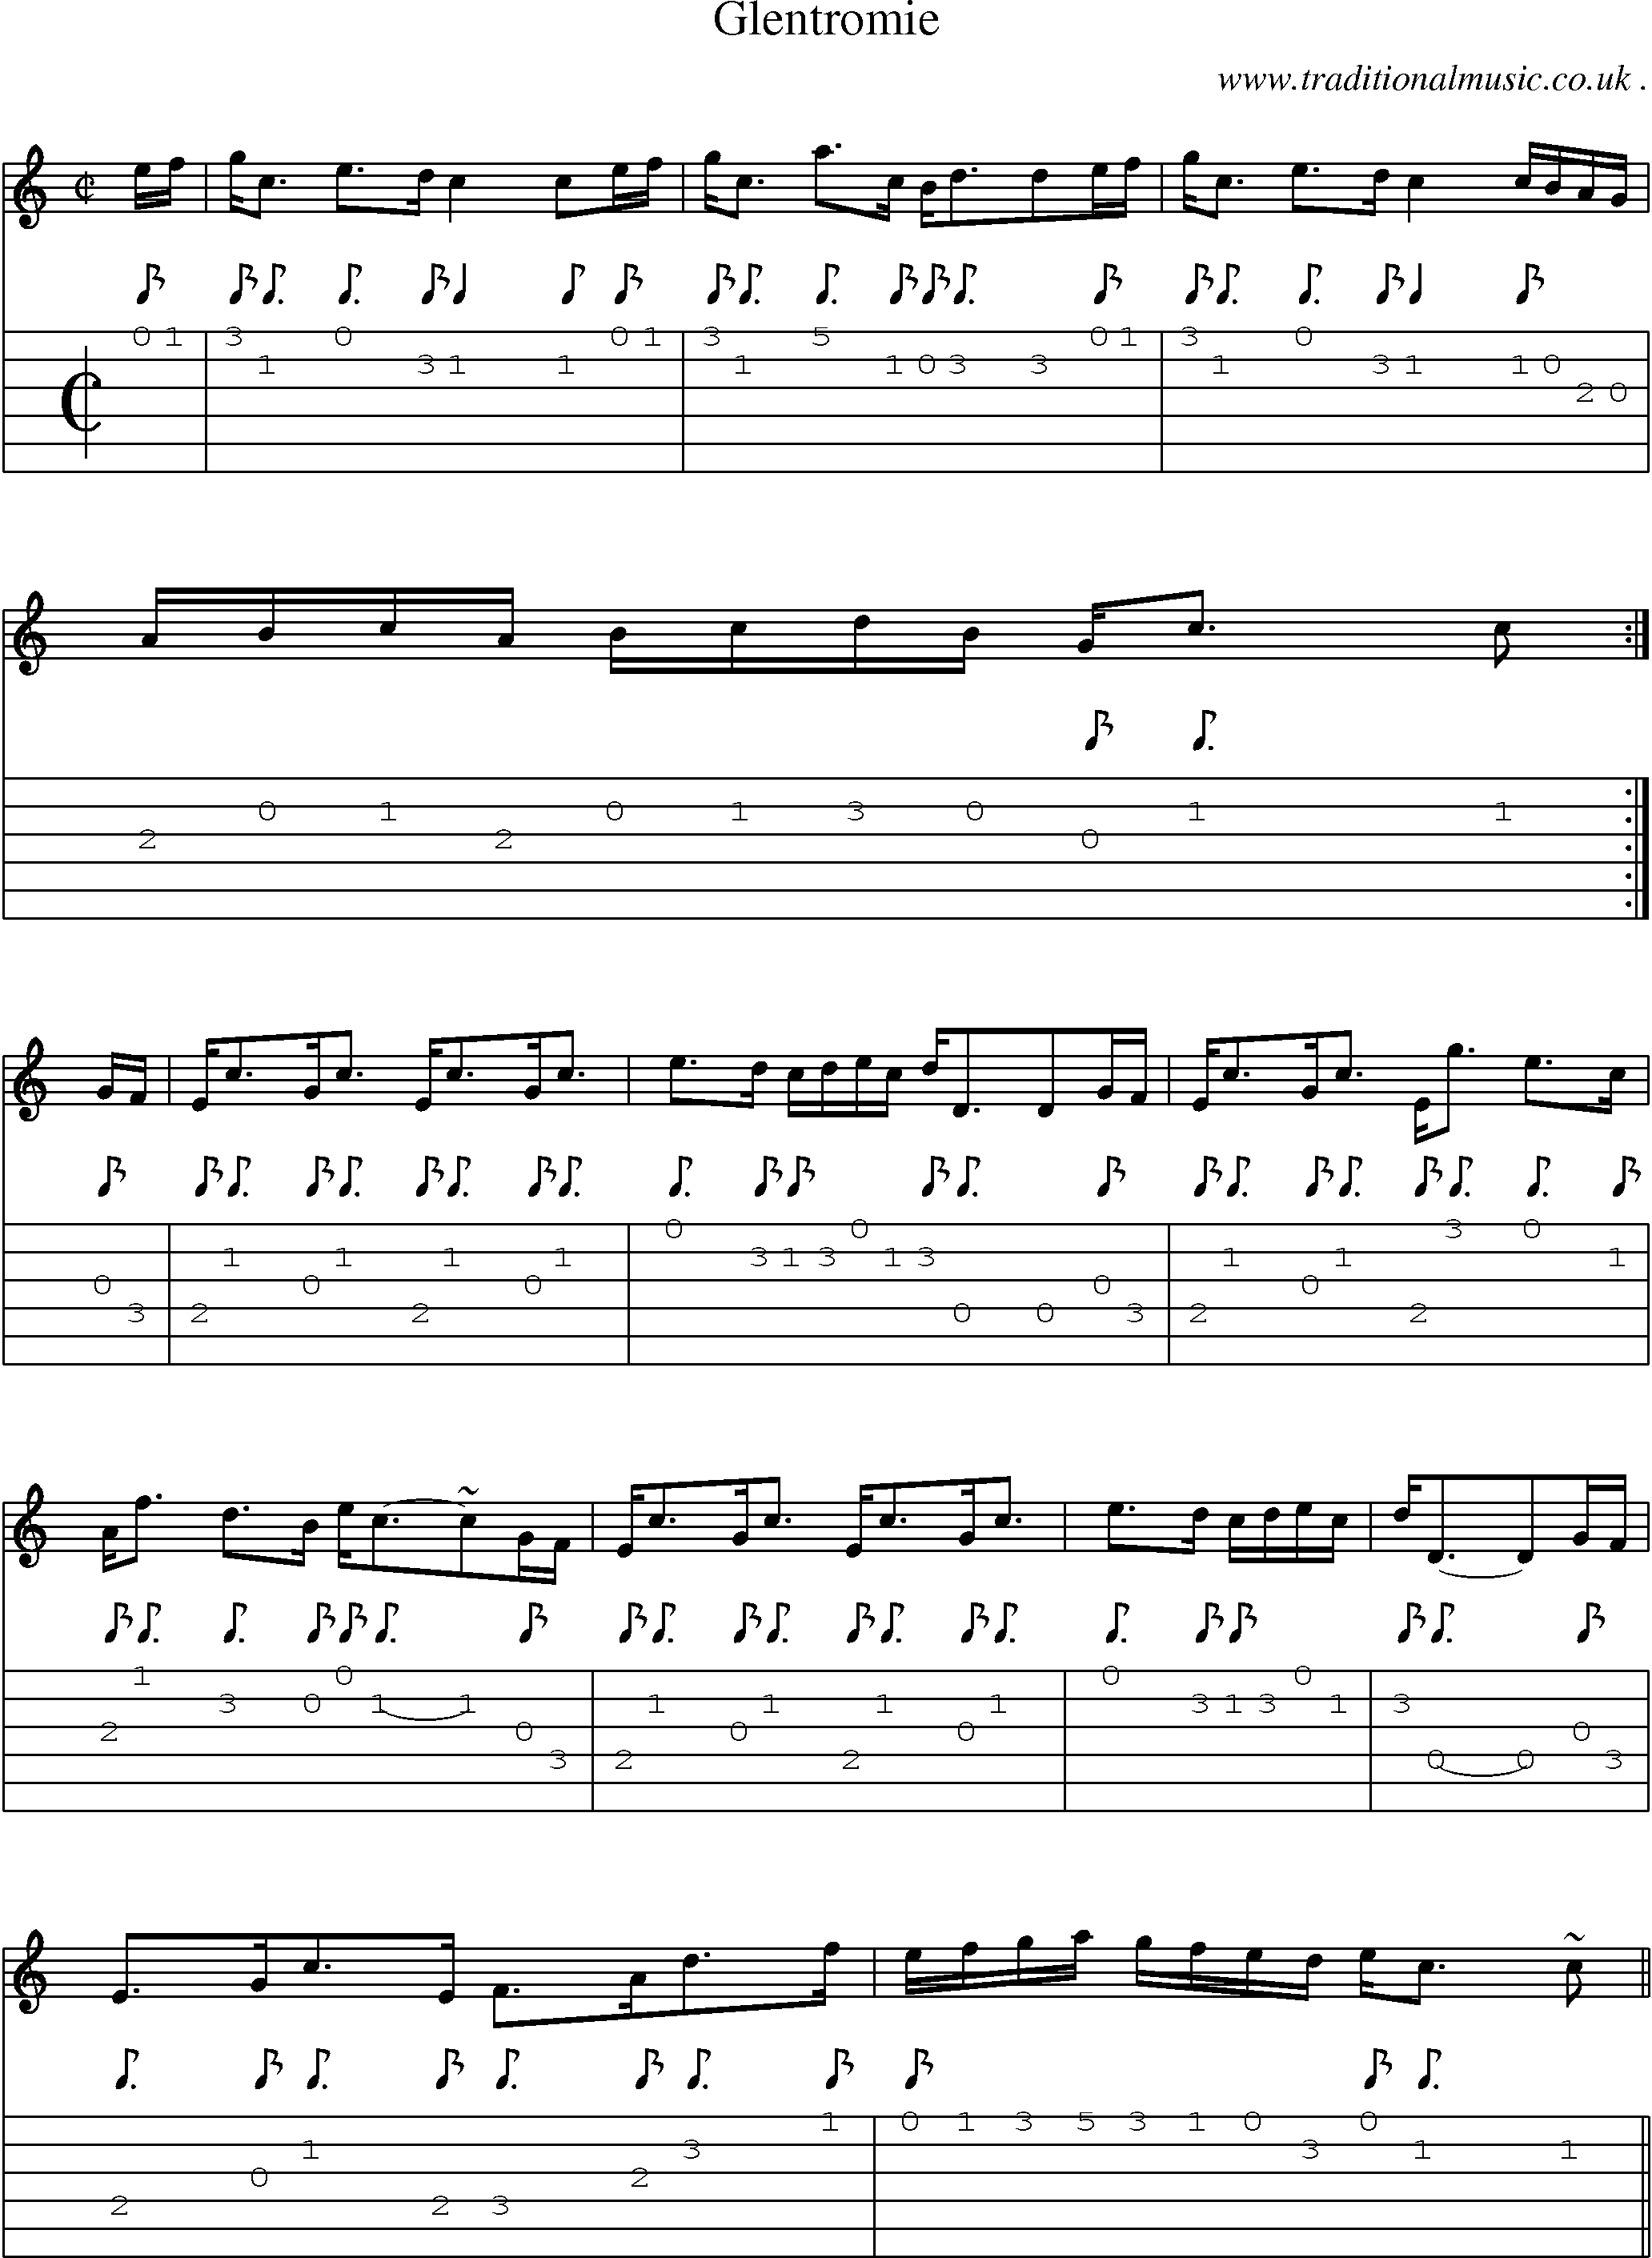 Sheet-music  score, Chords and Guitar Tabs for Glentromie